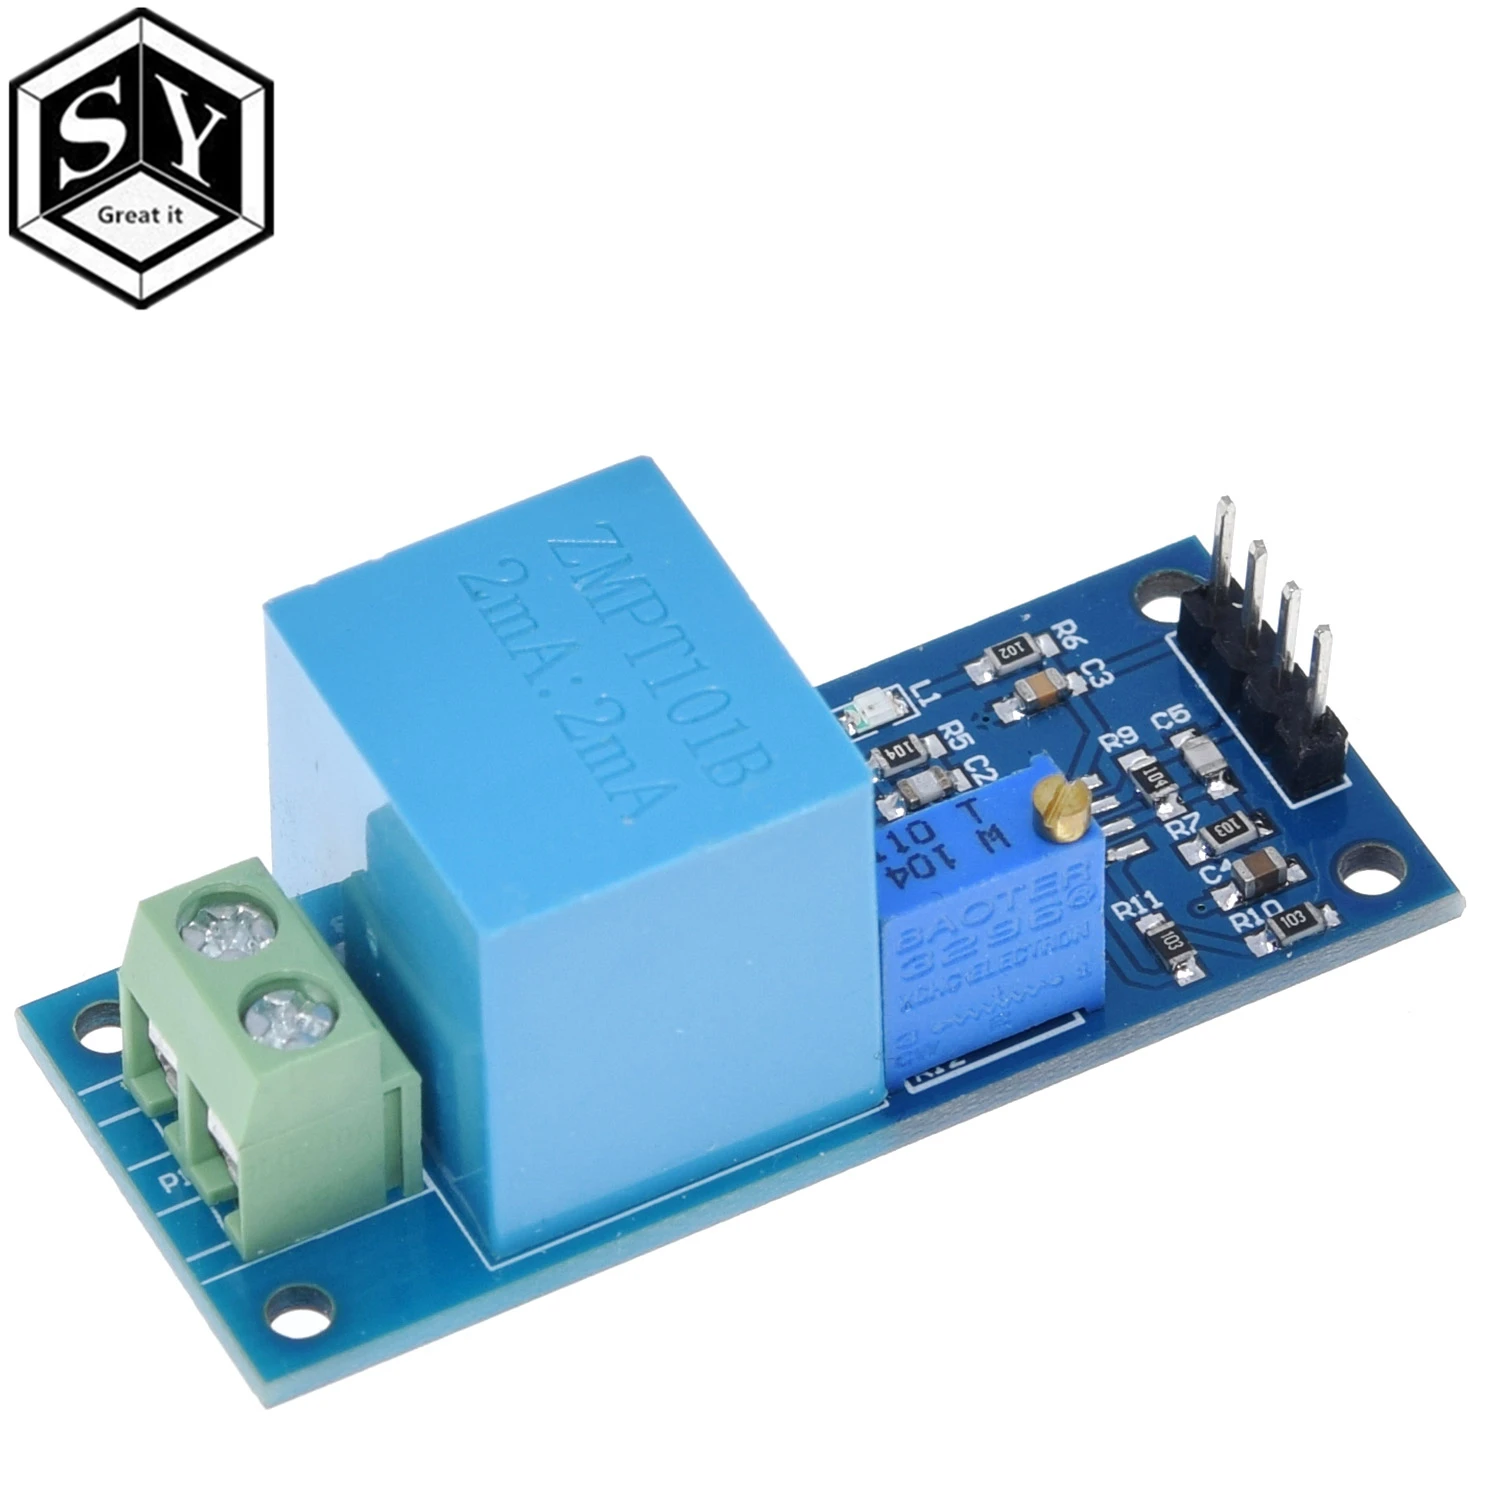 ZMPT101B Active single phase voltage transformer module AC output voltage seHFEH